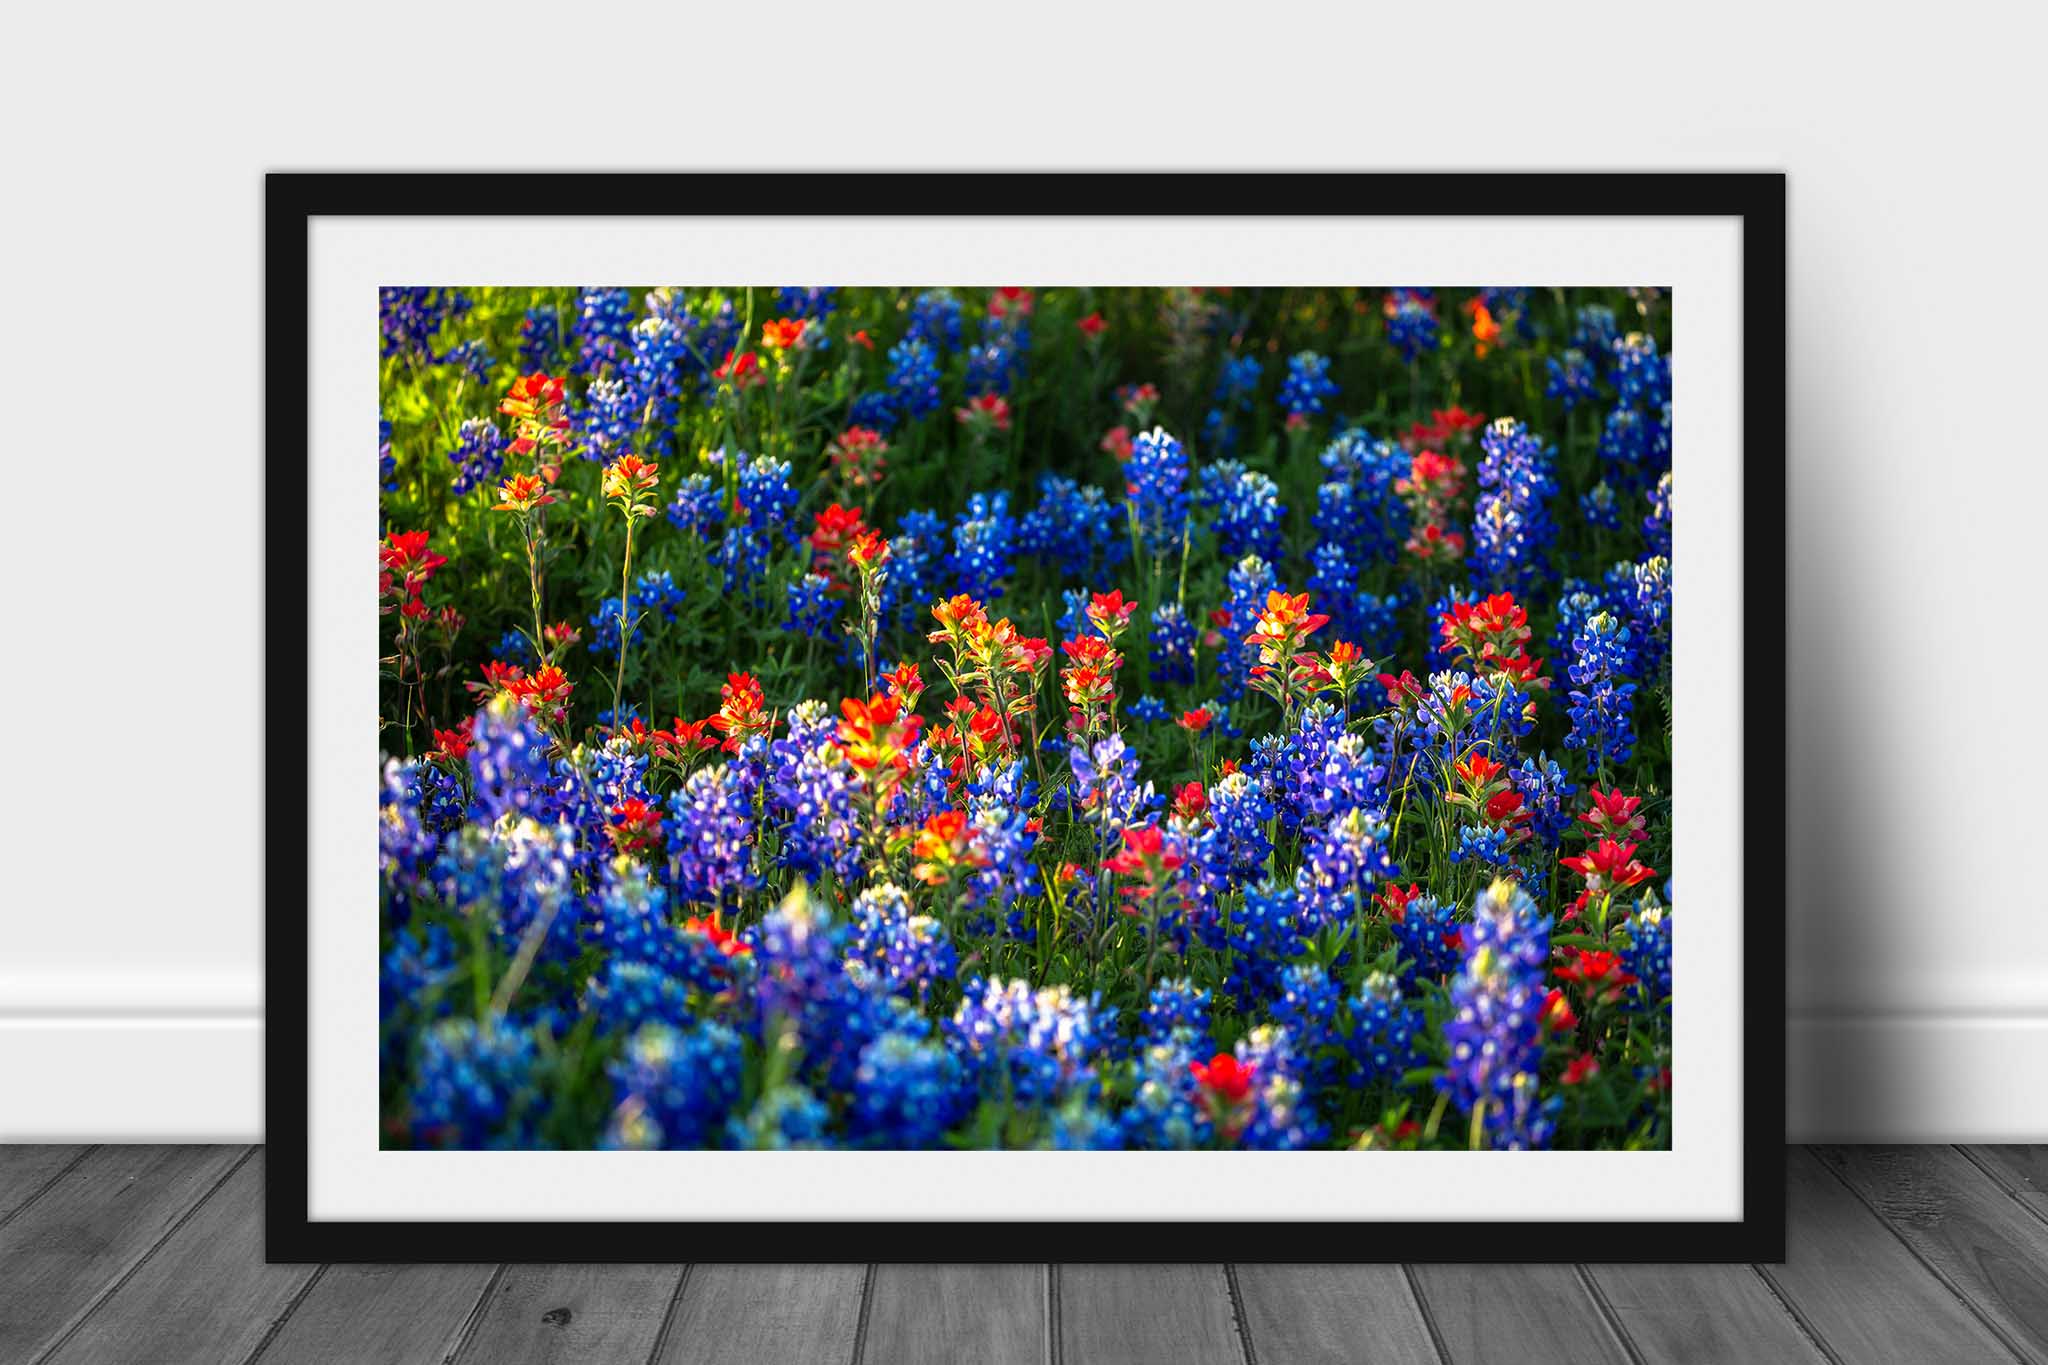 Framed and matted photography print of bluebonnets and Indian paintbrush wildflowers on a spring day in Texas by Sean Ramsey of Southern Plains Photography.